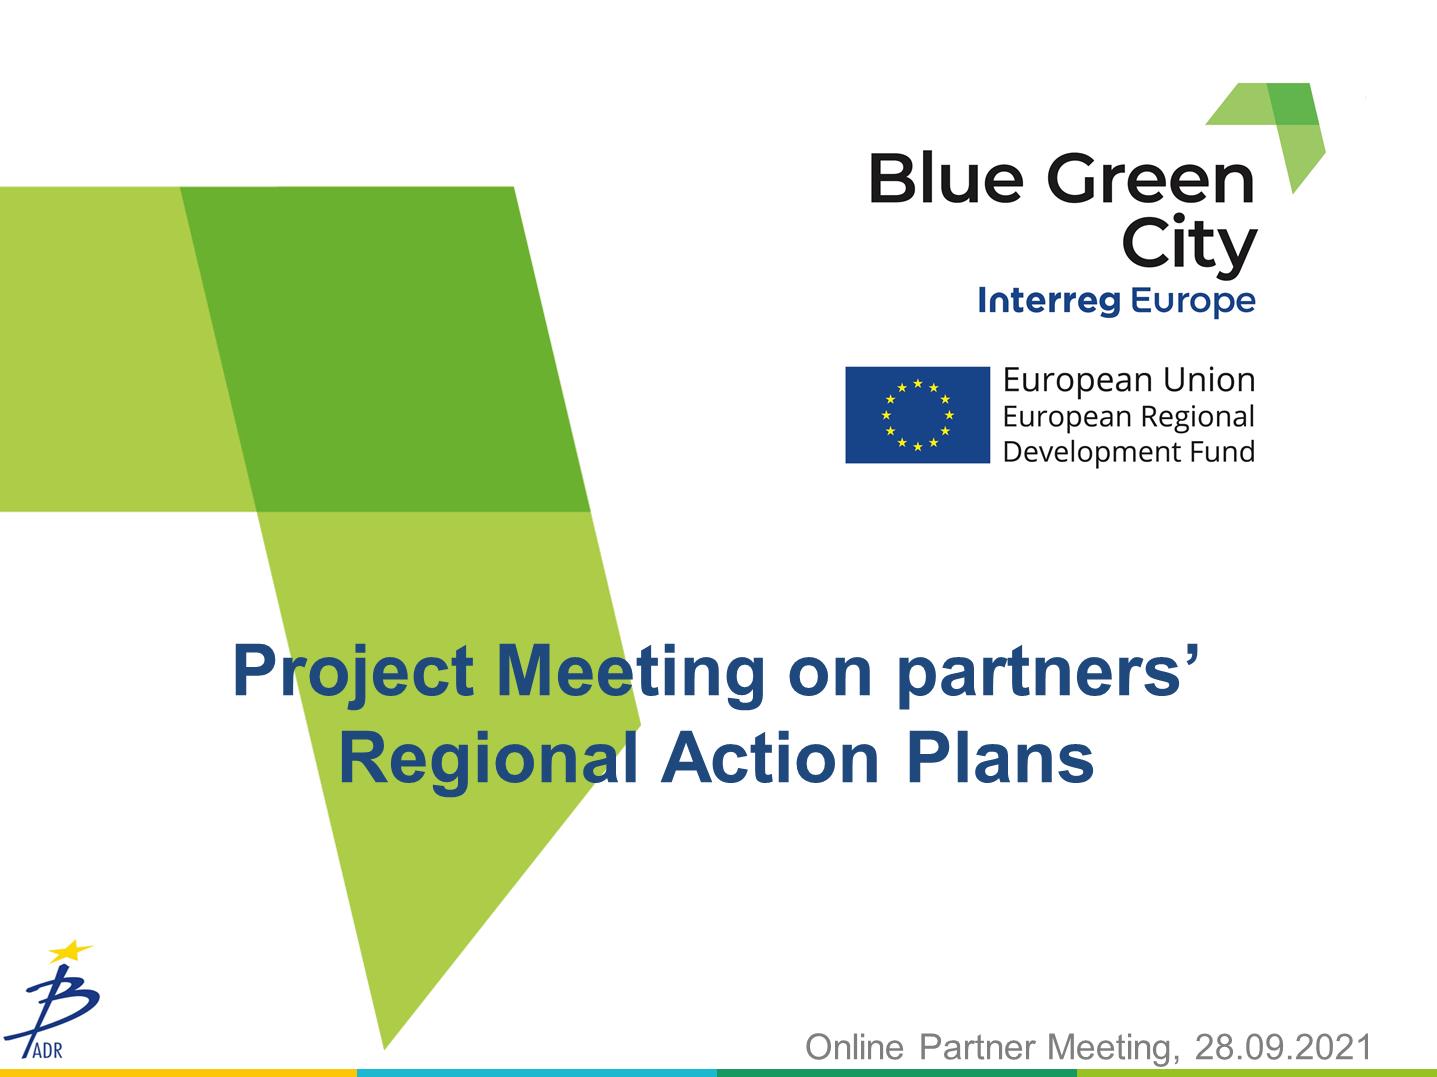 BGC online project meeting on partner’s Action Plans